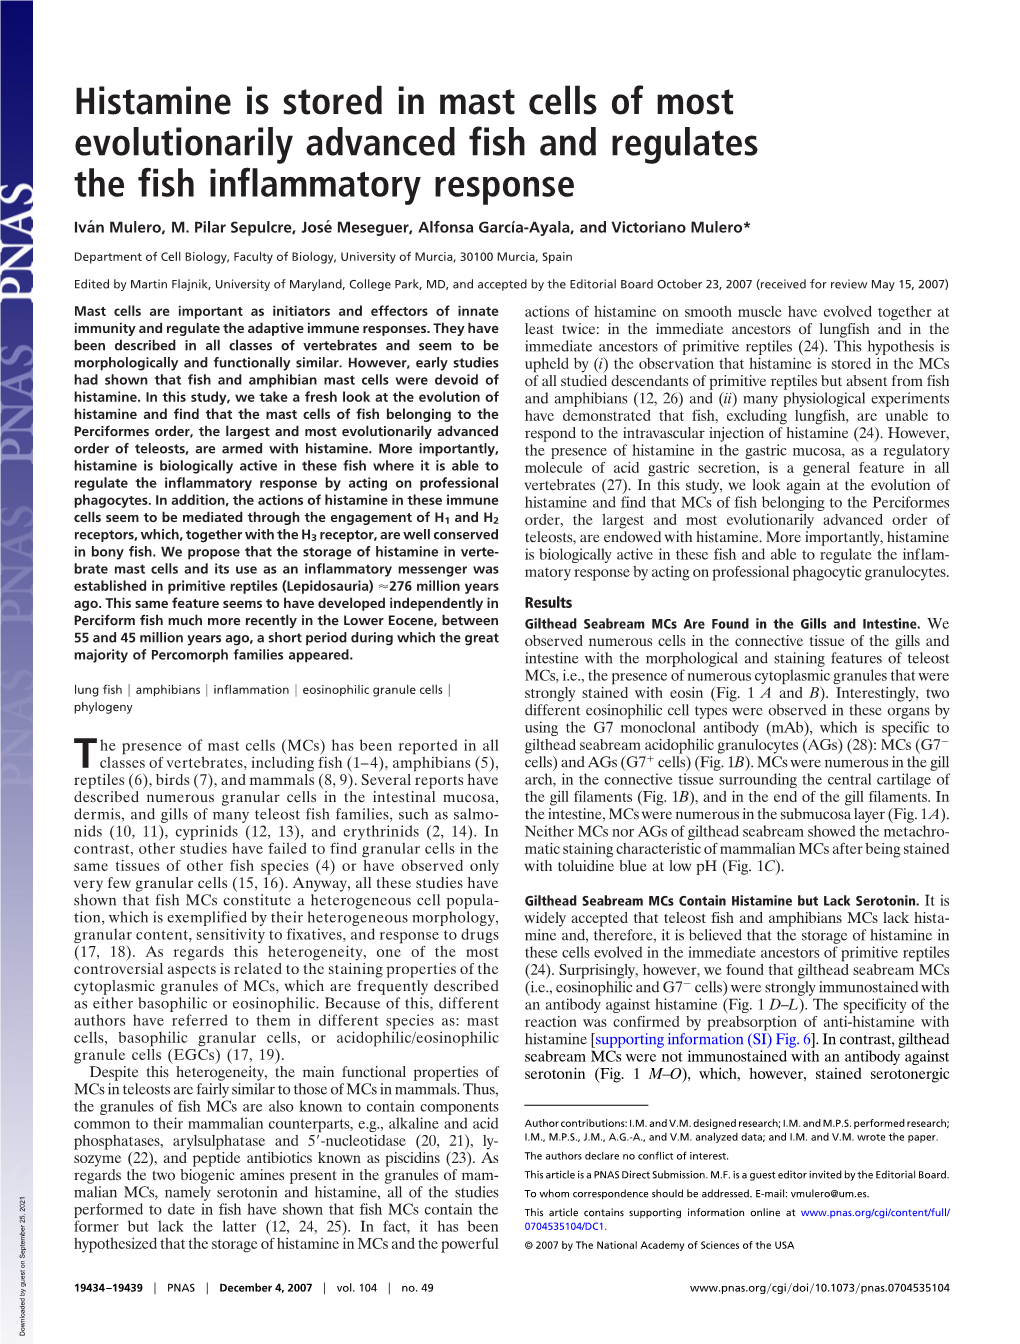 Histamine Is Stored in Mast Cells of Most Evolutionarily Advanced Fish and Regulates the Fish Inflammatory Response